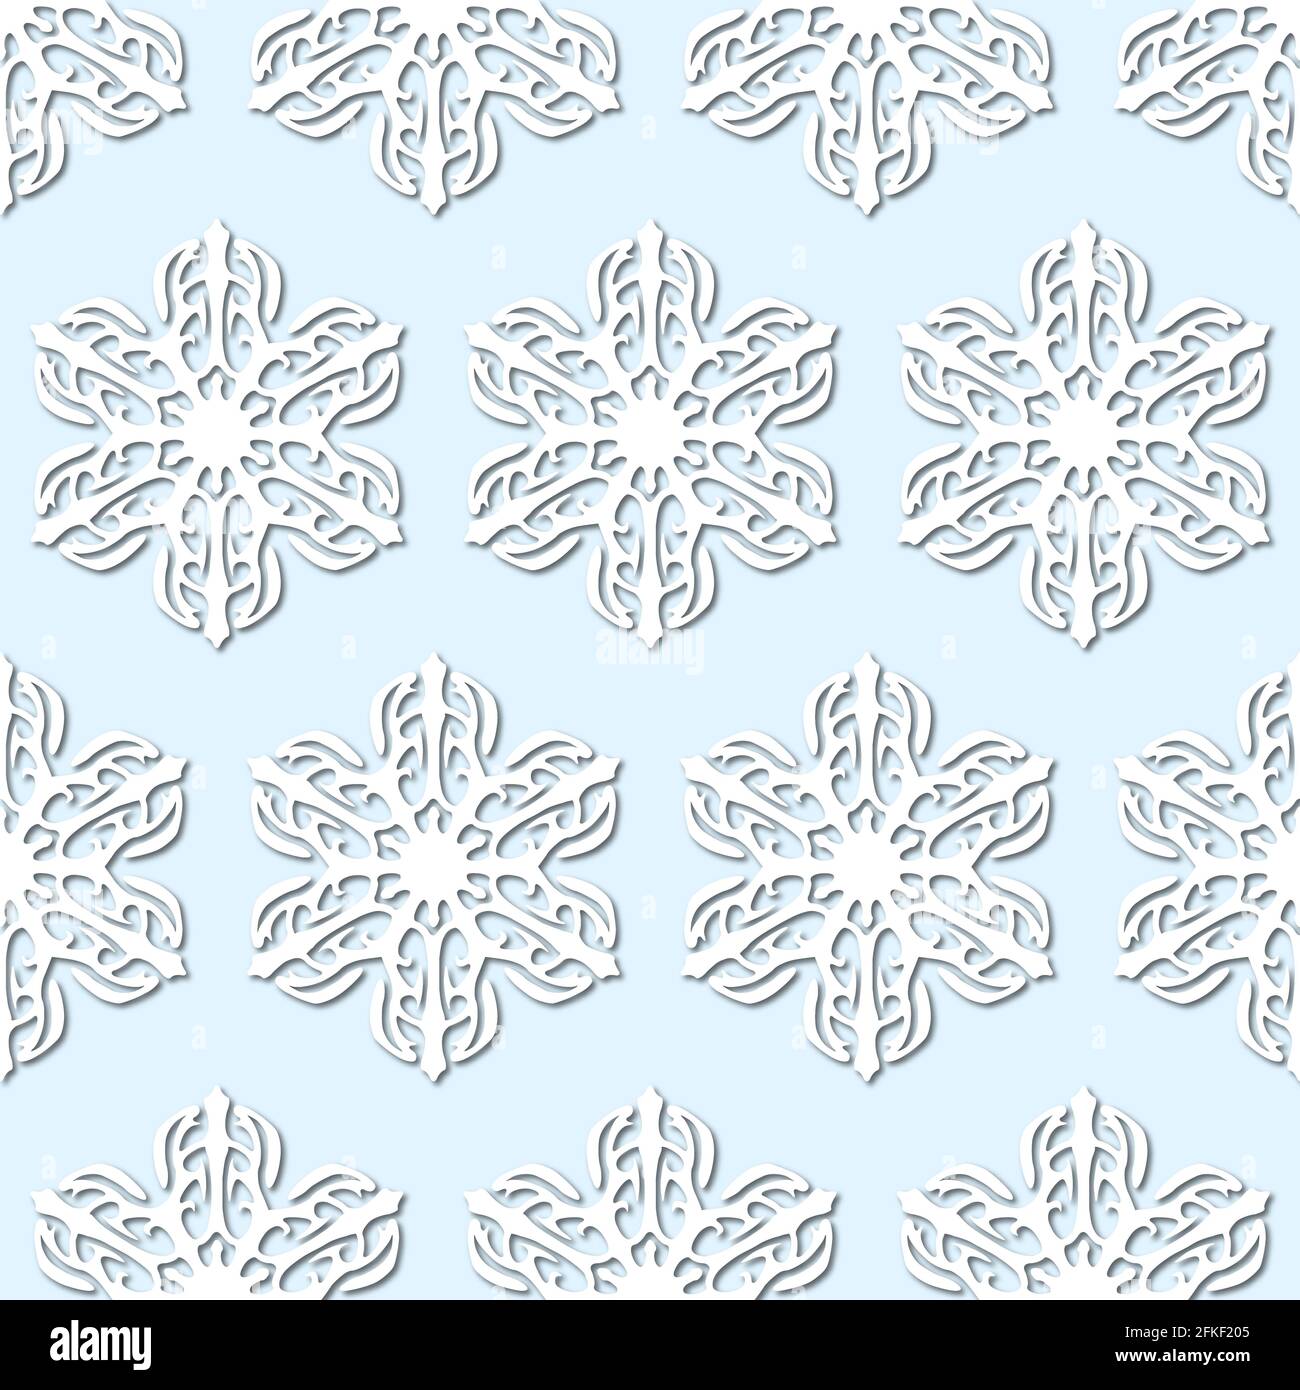 White snowflakes on pale blue background, damask ornament seamless pattern. Paper cut style with drop shadows and highlights. Stock Photo